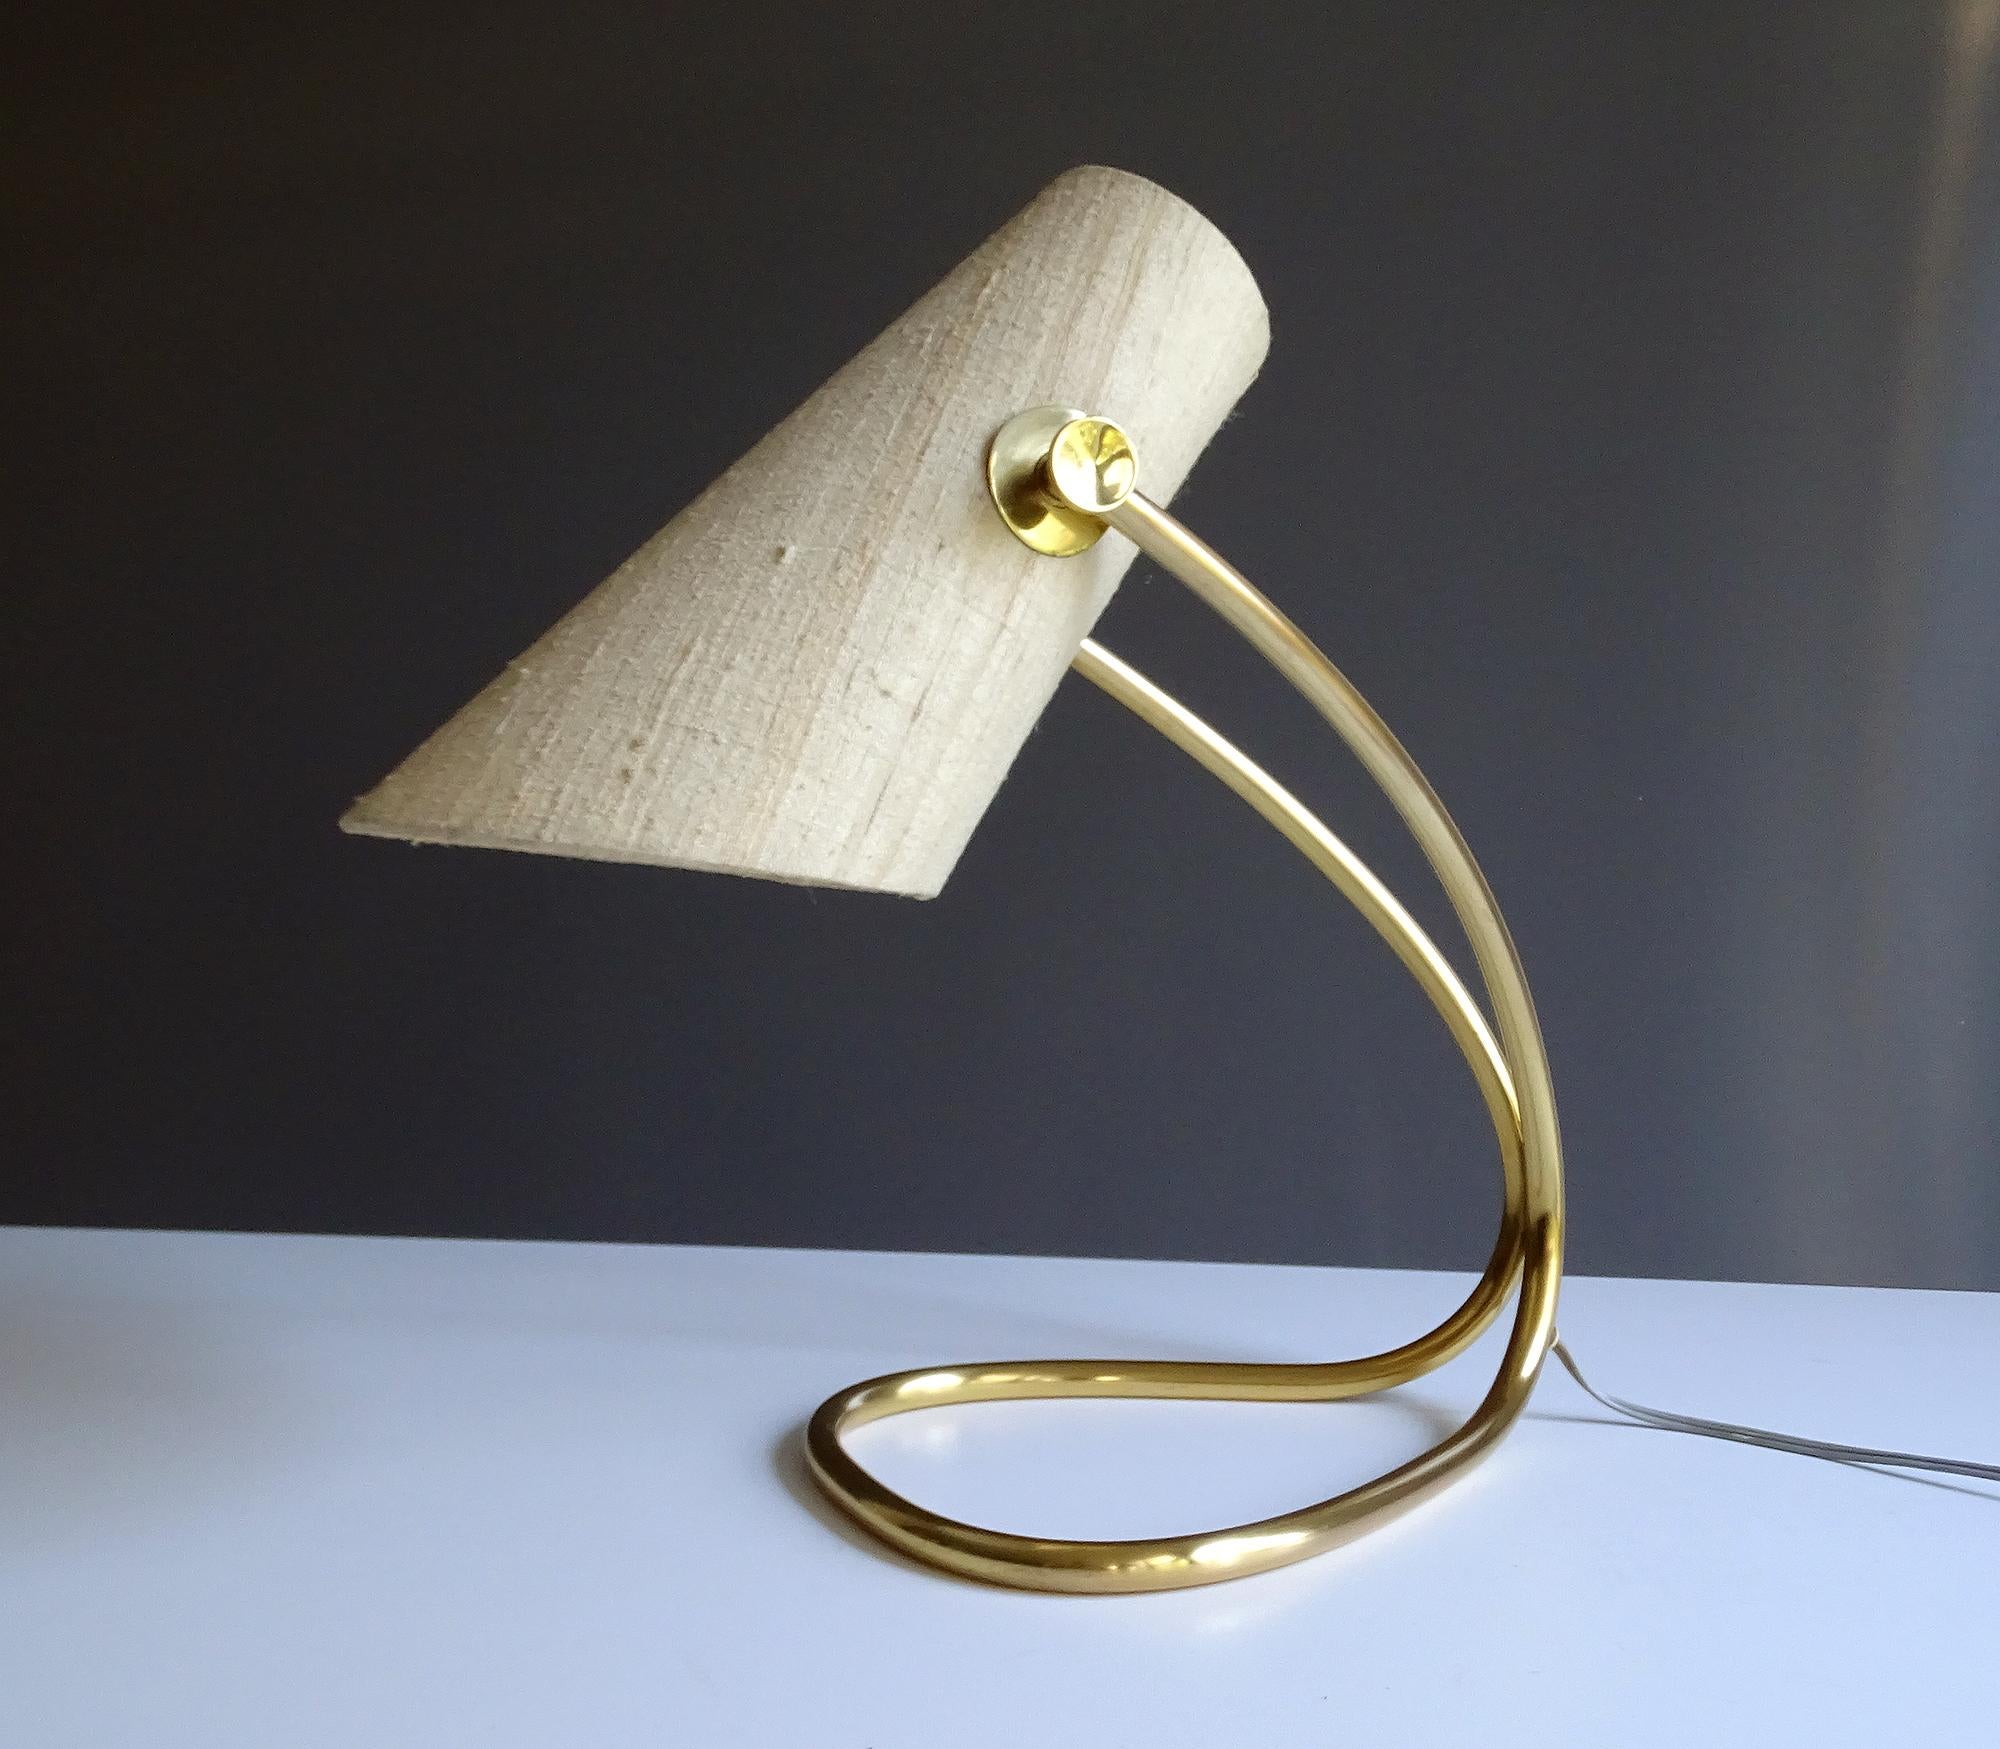 All our light´s electricals are professionally checked and tested for worldwide use
Extremely rare midcentury desk lamp by Nikoll Austria , featuring a continuous loop brass base, with concealed shade suspension, asymmetrical shade with two knoby